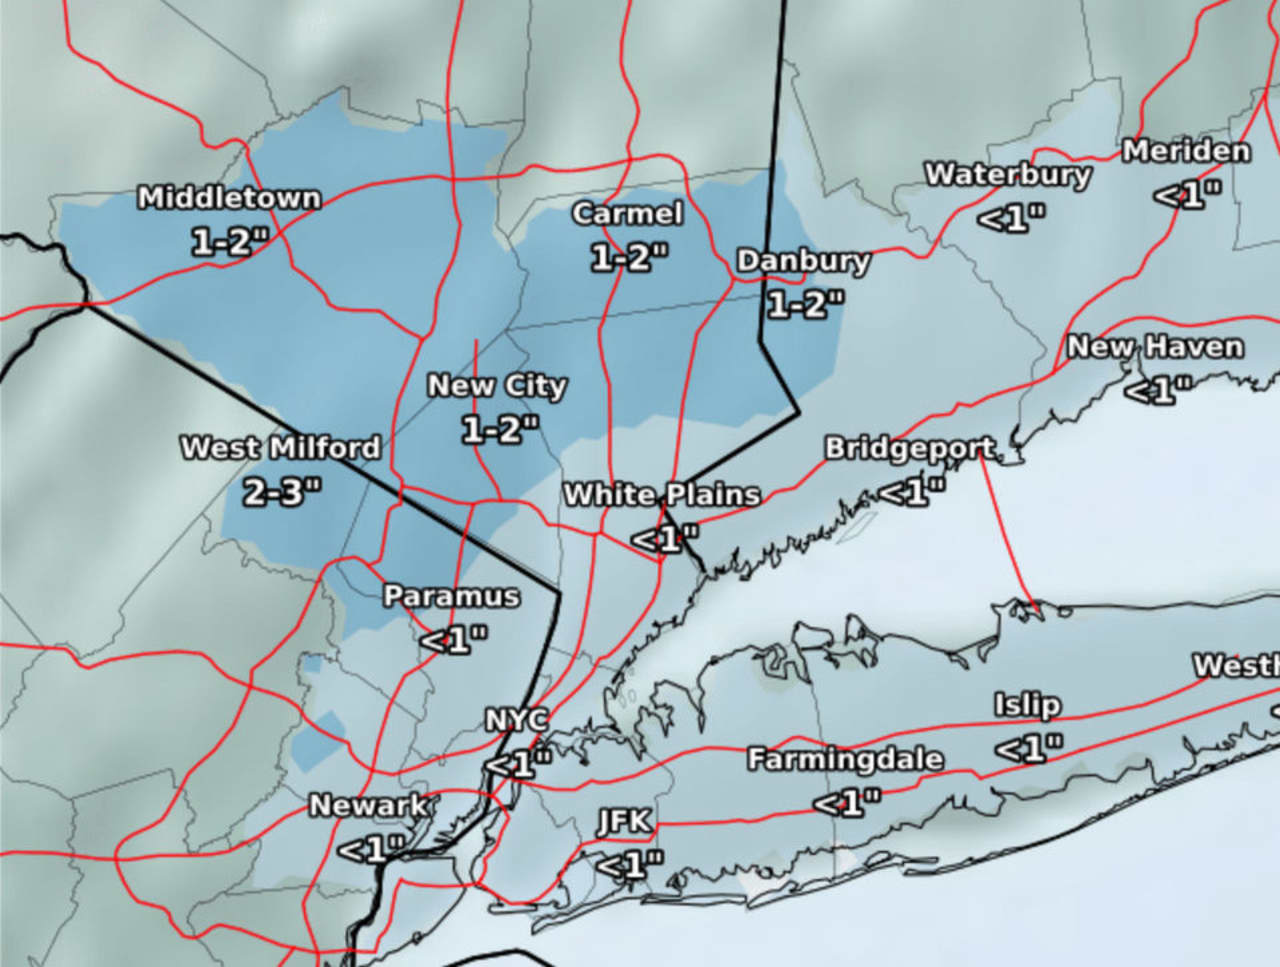 A fast-moving storm will bring a dusting of snow to New Jersey